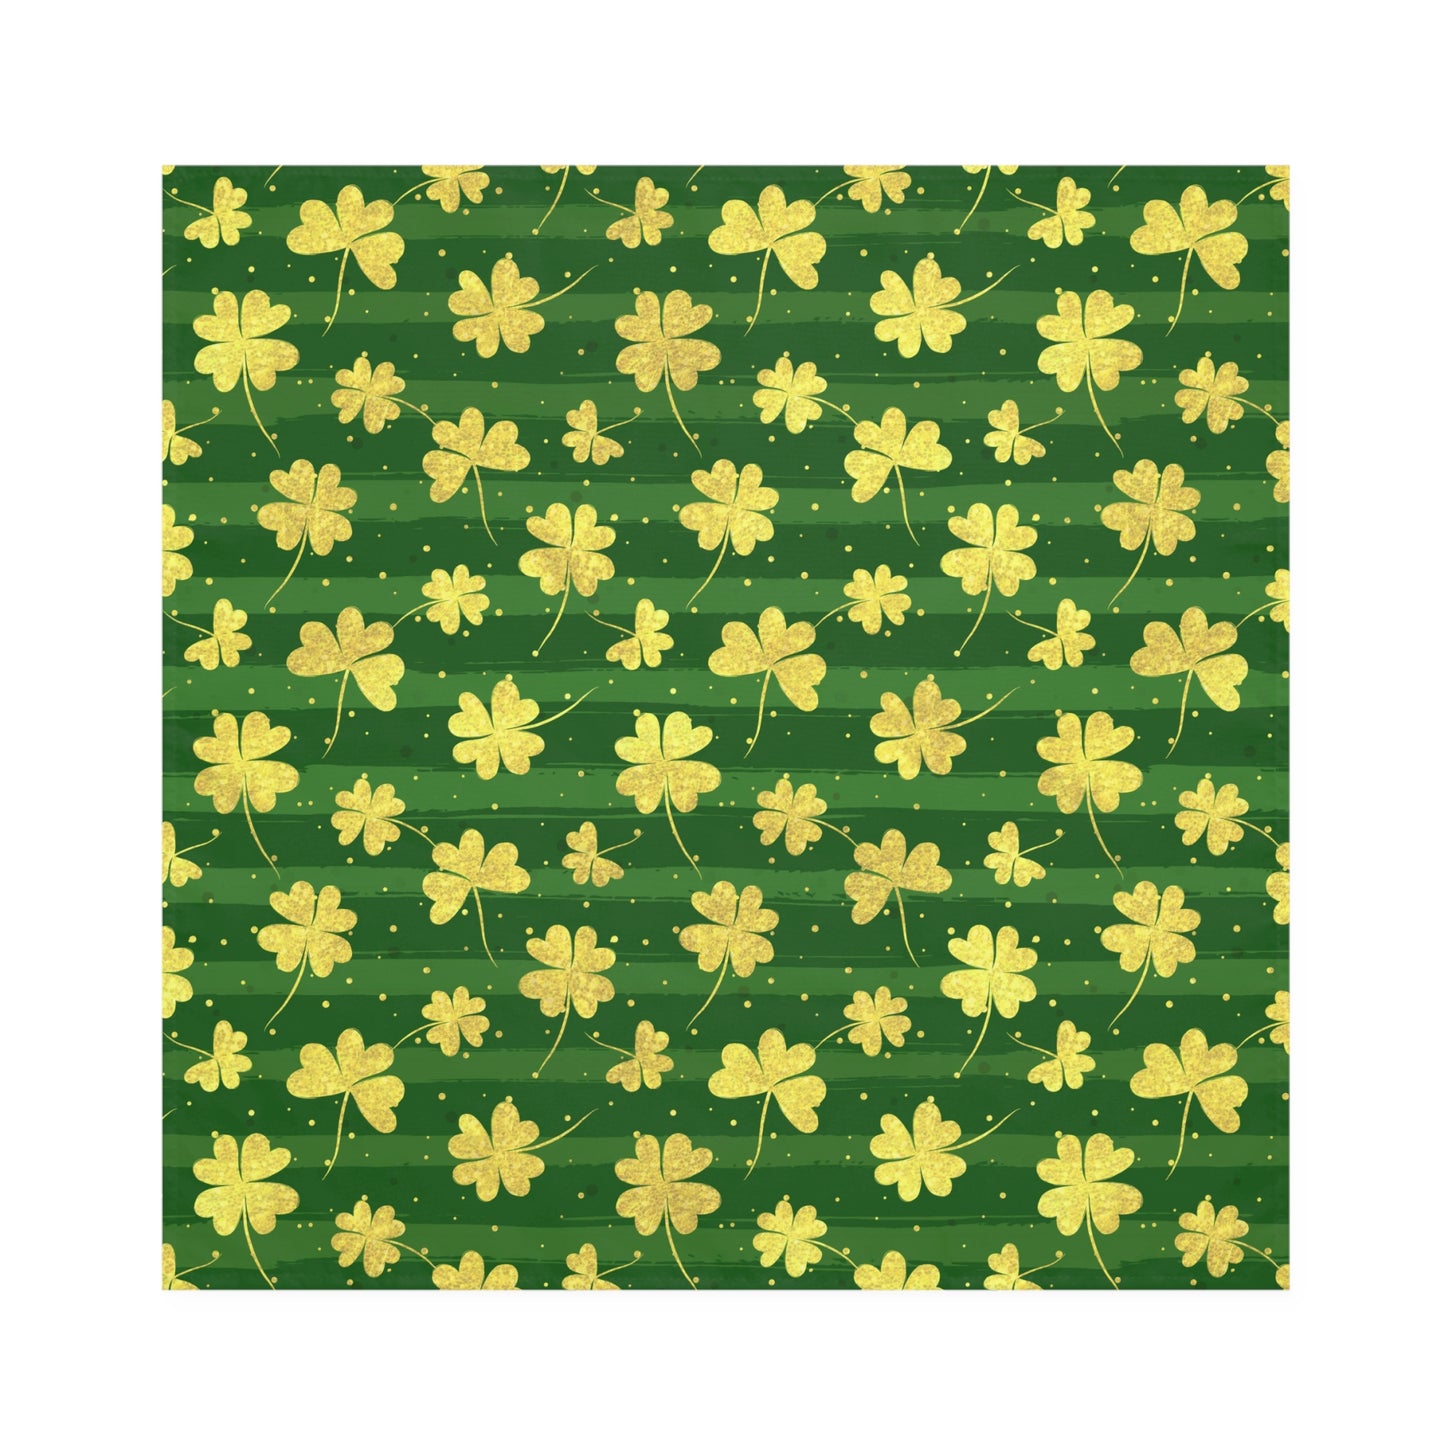 Gold Clovers Cloth Napkins 4 Pack 19x19